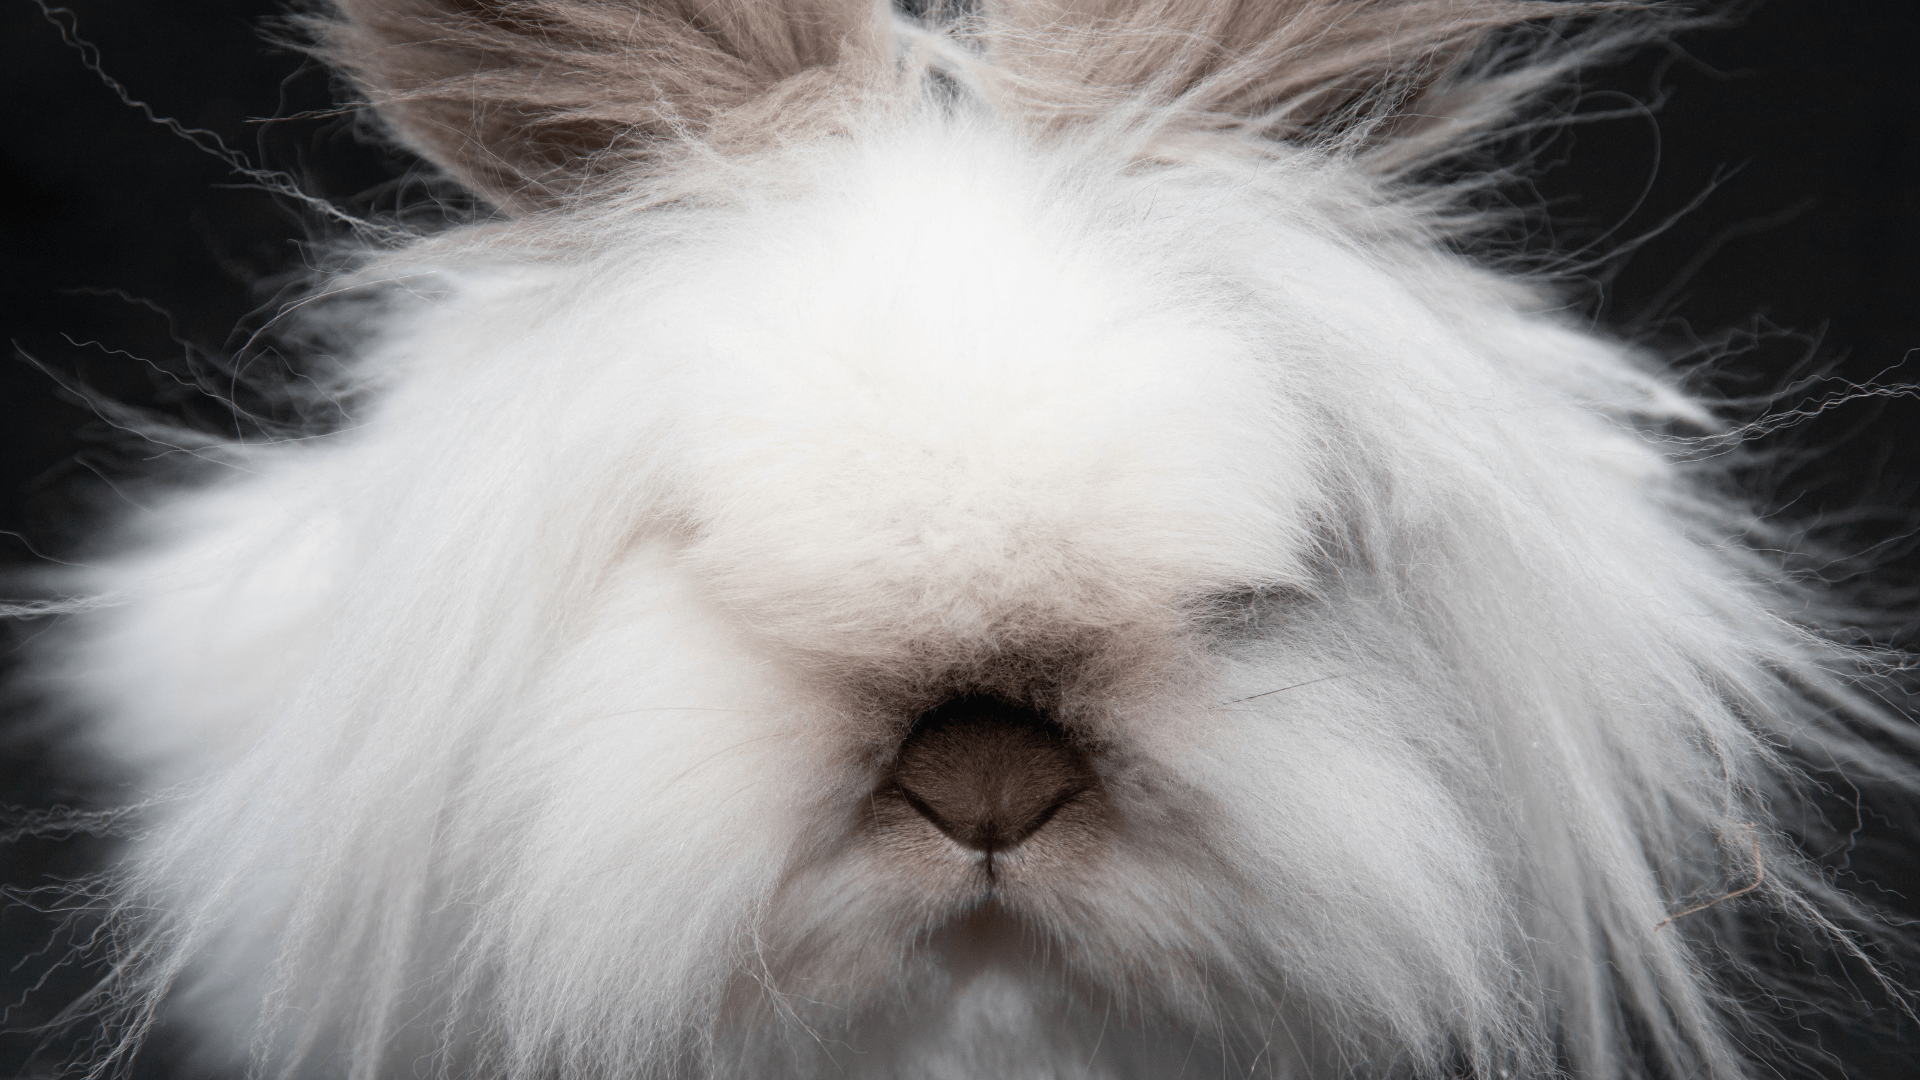 What is all the fuss about the Lionhead rabbit